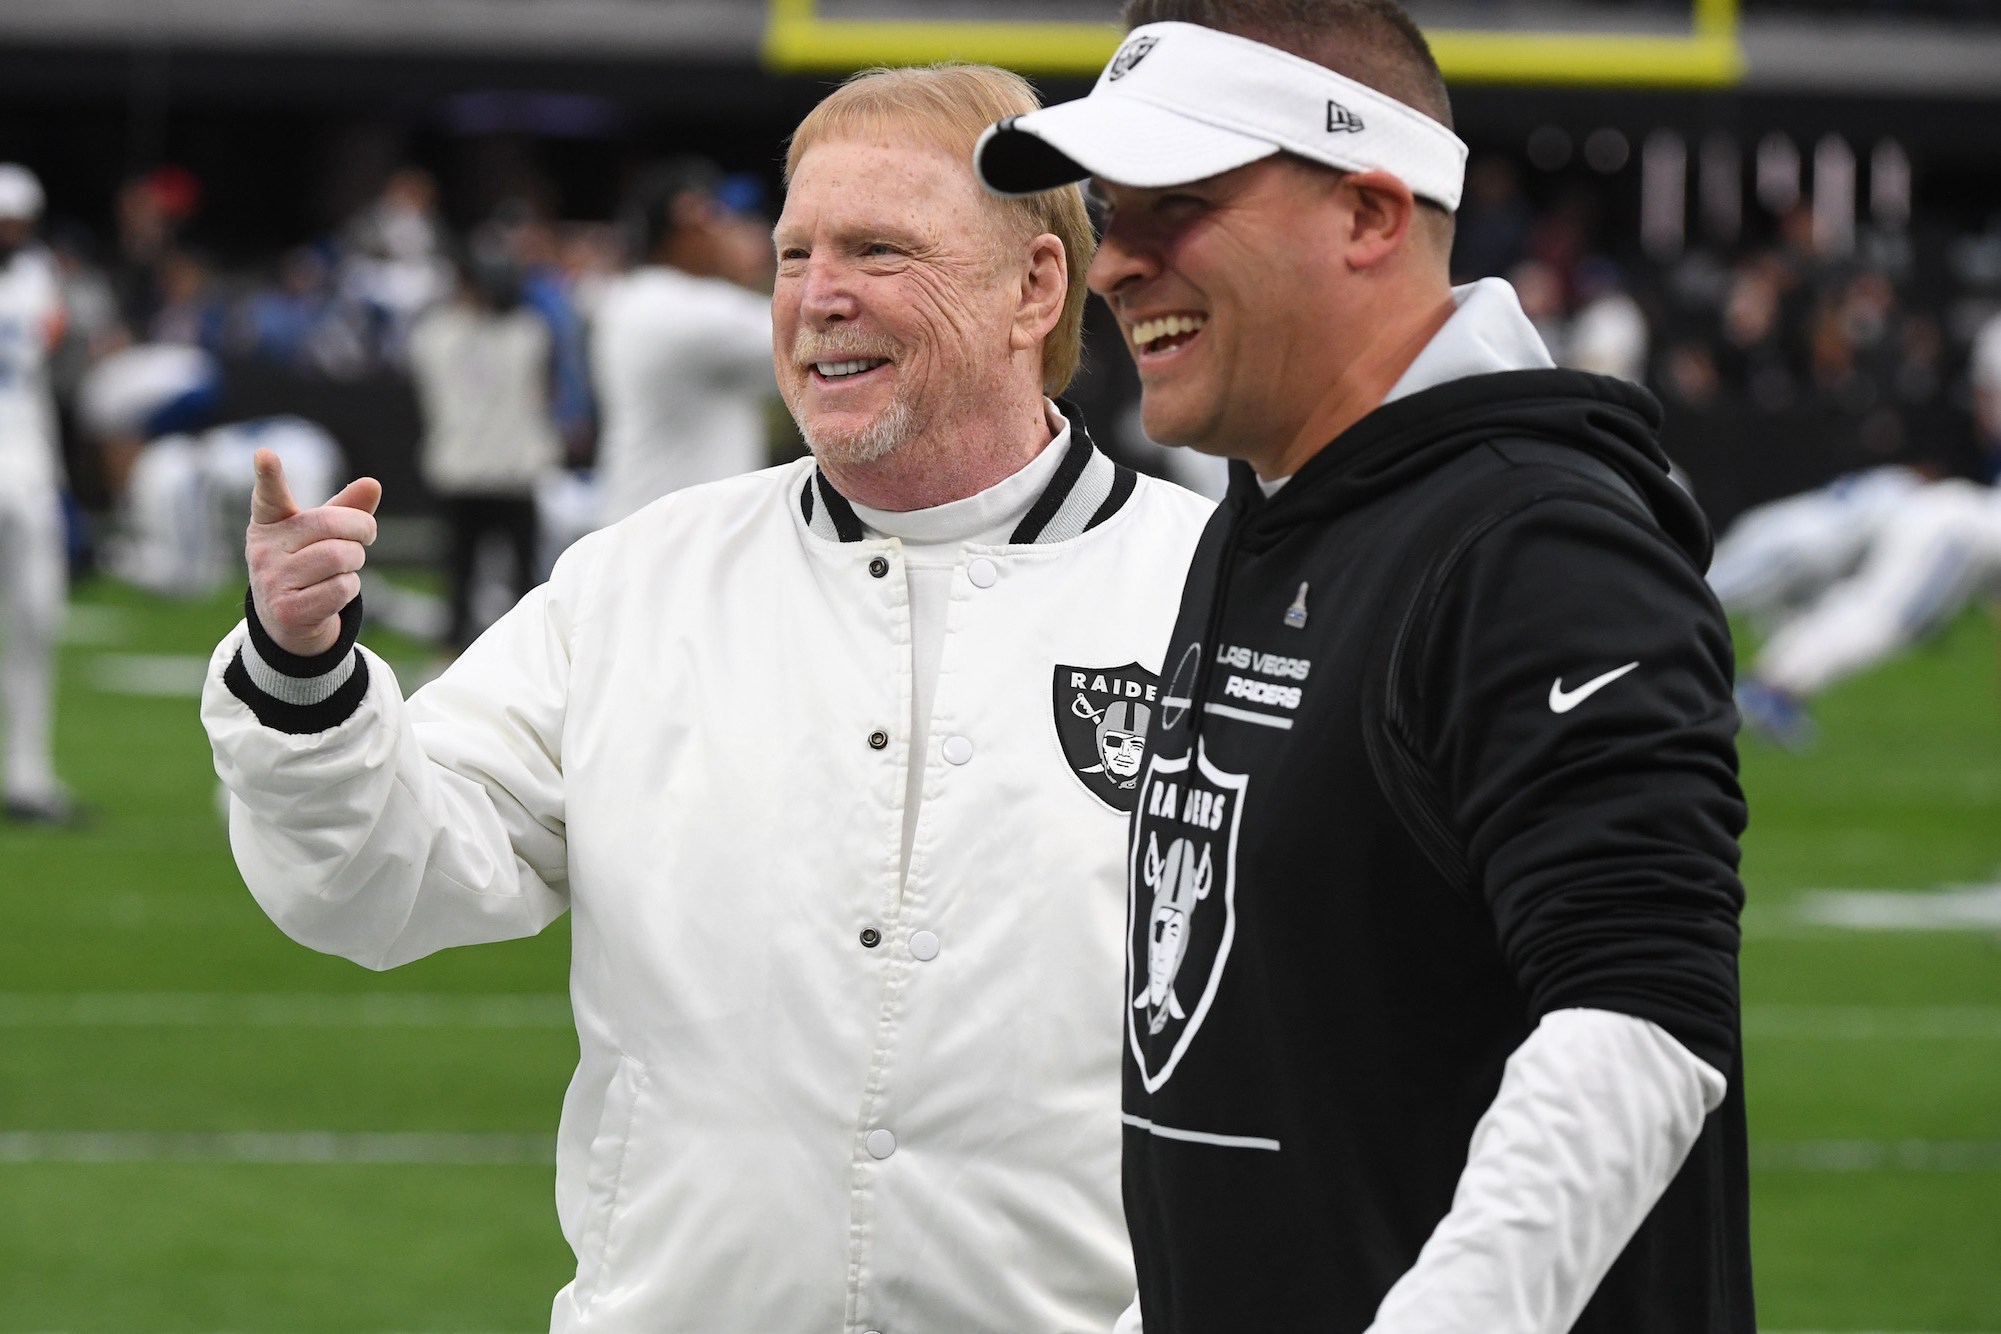 LAS VEGAS, NEVADA - NOVEMBER 13: Las Vegas Owner Mark Davis speaks with Head coach Josh McDaniels prior to the game against the Indianapolis Colts at Allegiant Stadium on November 13, 2022 in Las Vegas, Nevada. (Photo by Sam Morris/Getty Images)